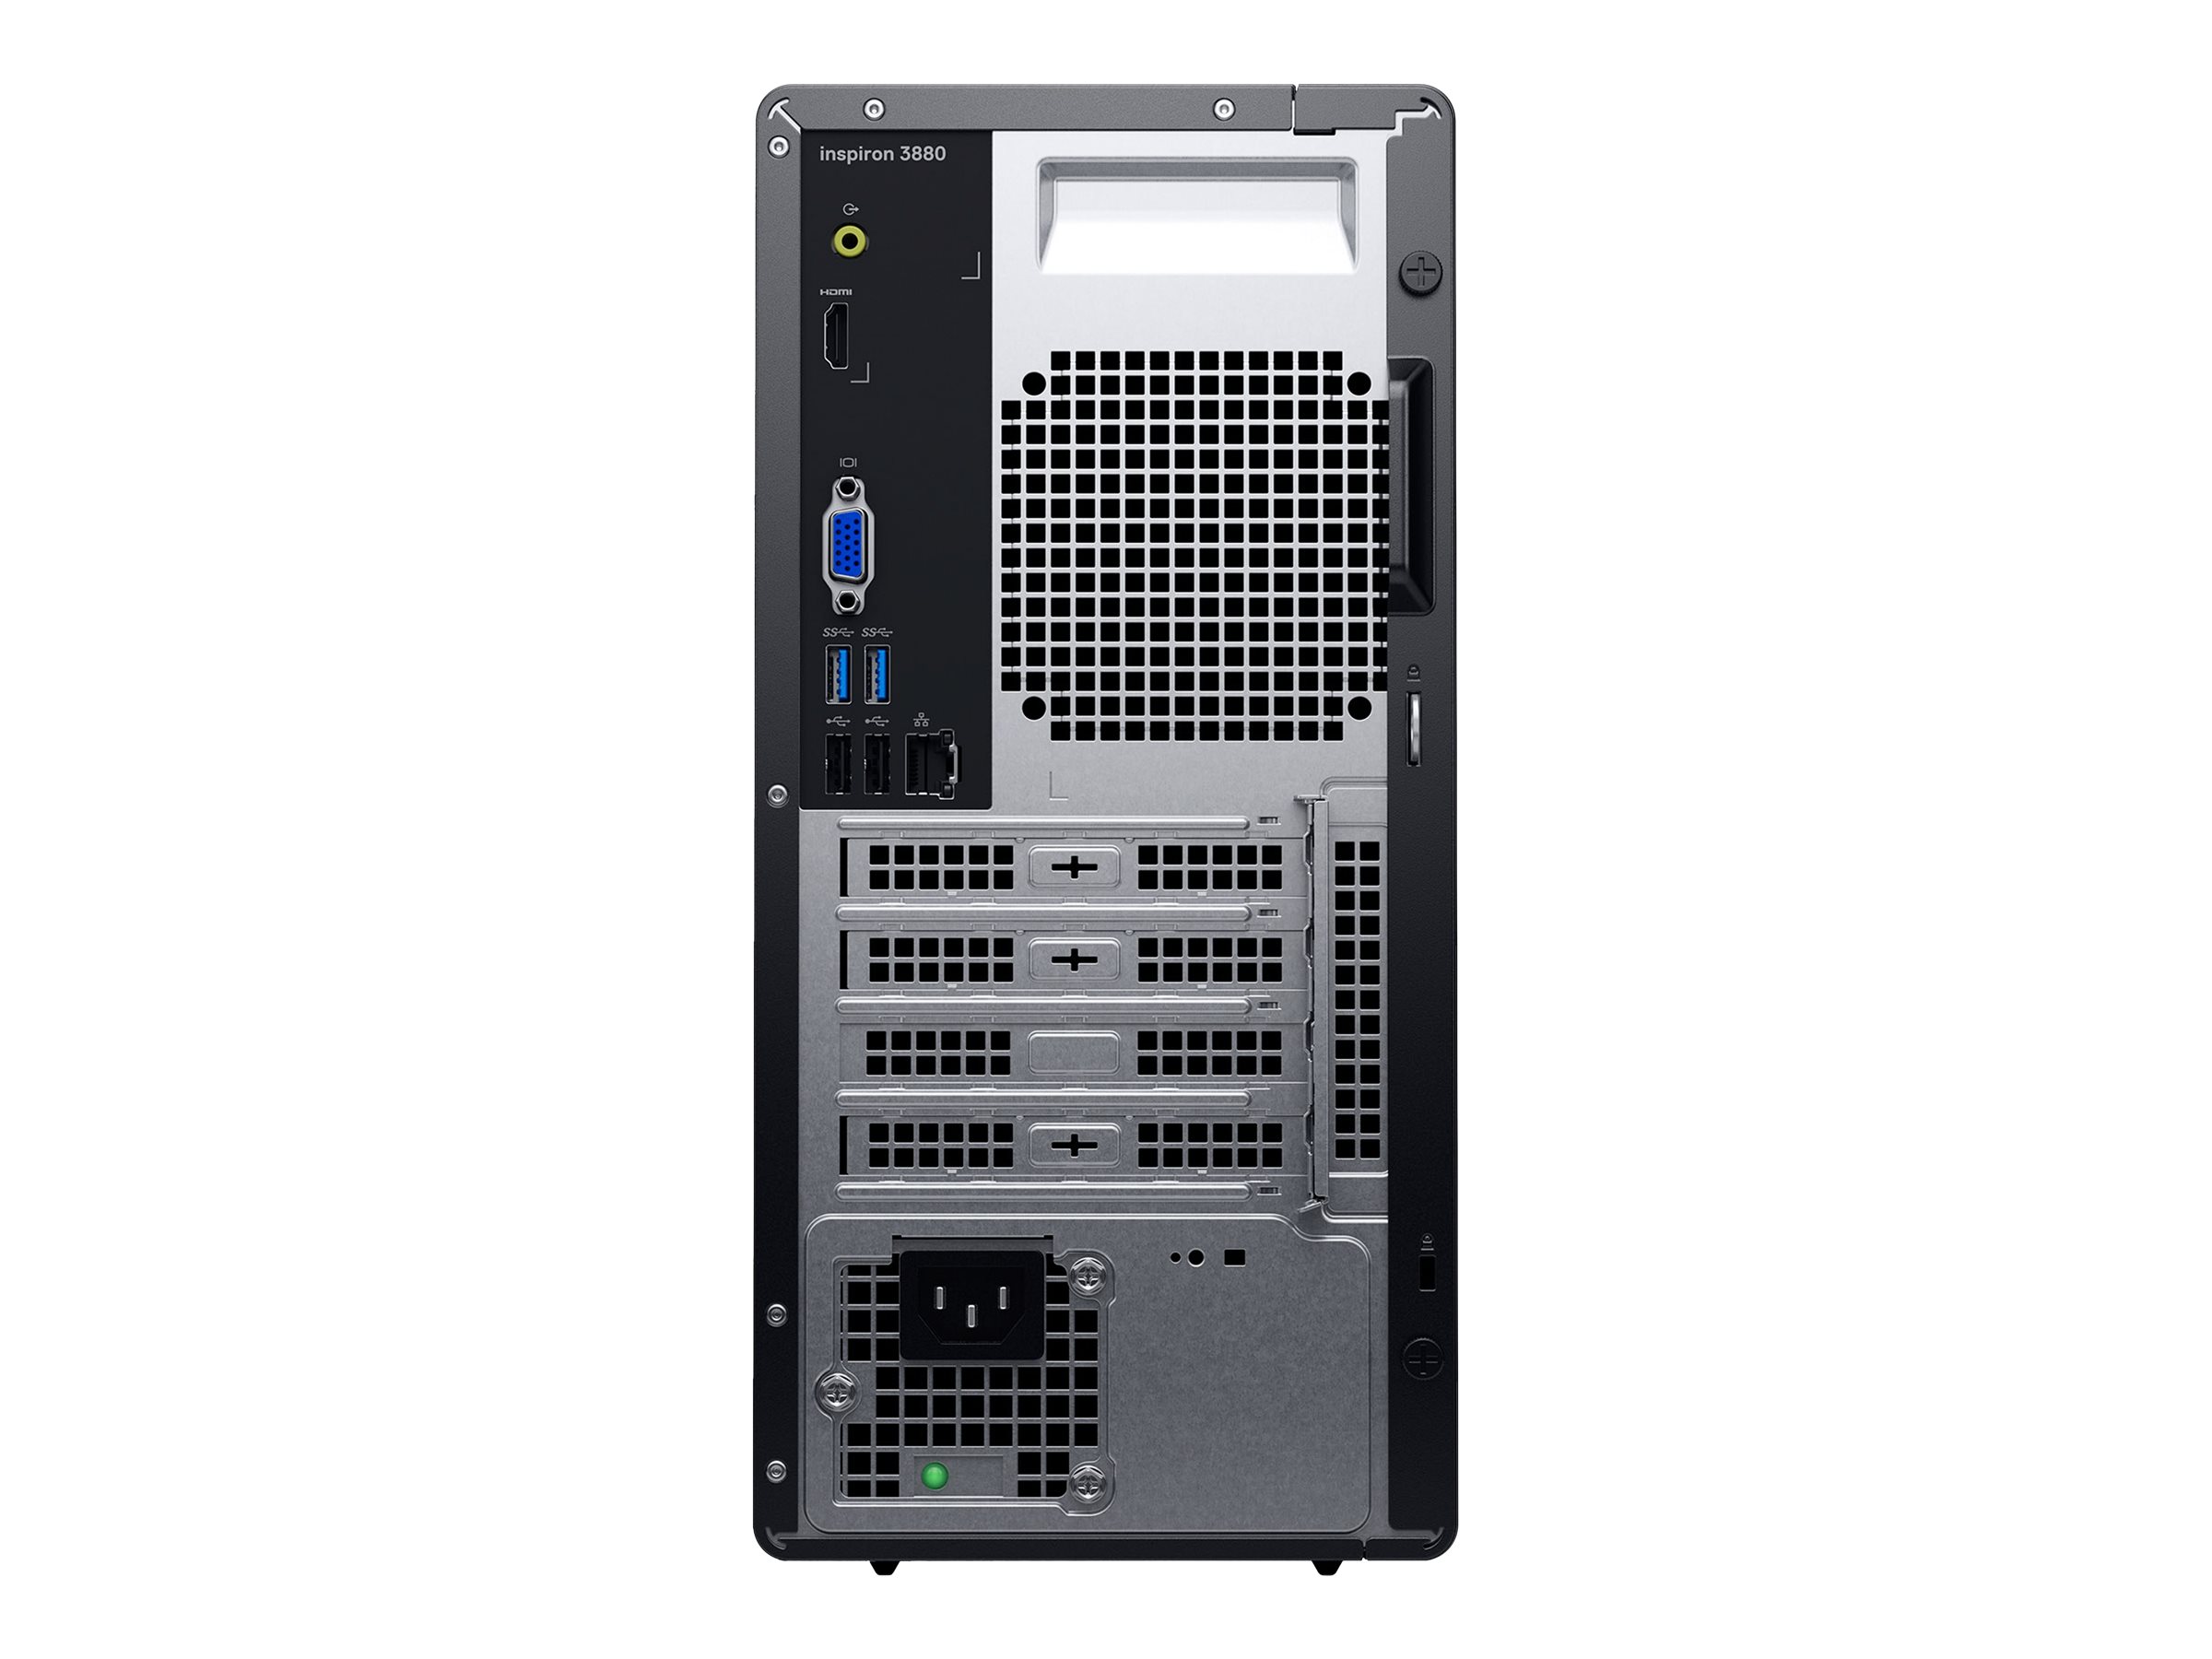 Dell Inspiron 3880 - Compact desktop - Core i7 10700 / 2.9 GHz - RAM 8 GB - SSD 512 GB - NVMe - DVD-Writer - UHD Graphics 630 - GigE - WLAN: Bluetooth, 802.11a/b/g/n/ac - Win 10 Home 64-bit - monitor: none - black - image 5 of 6